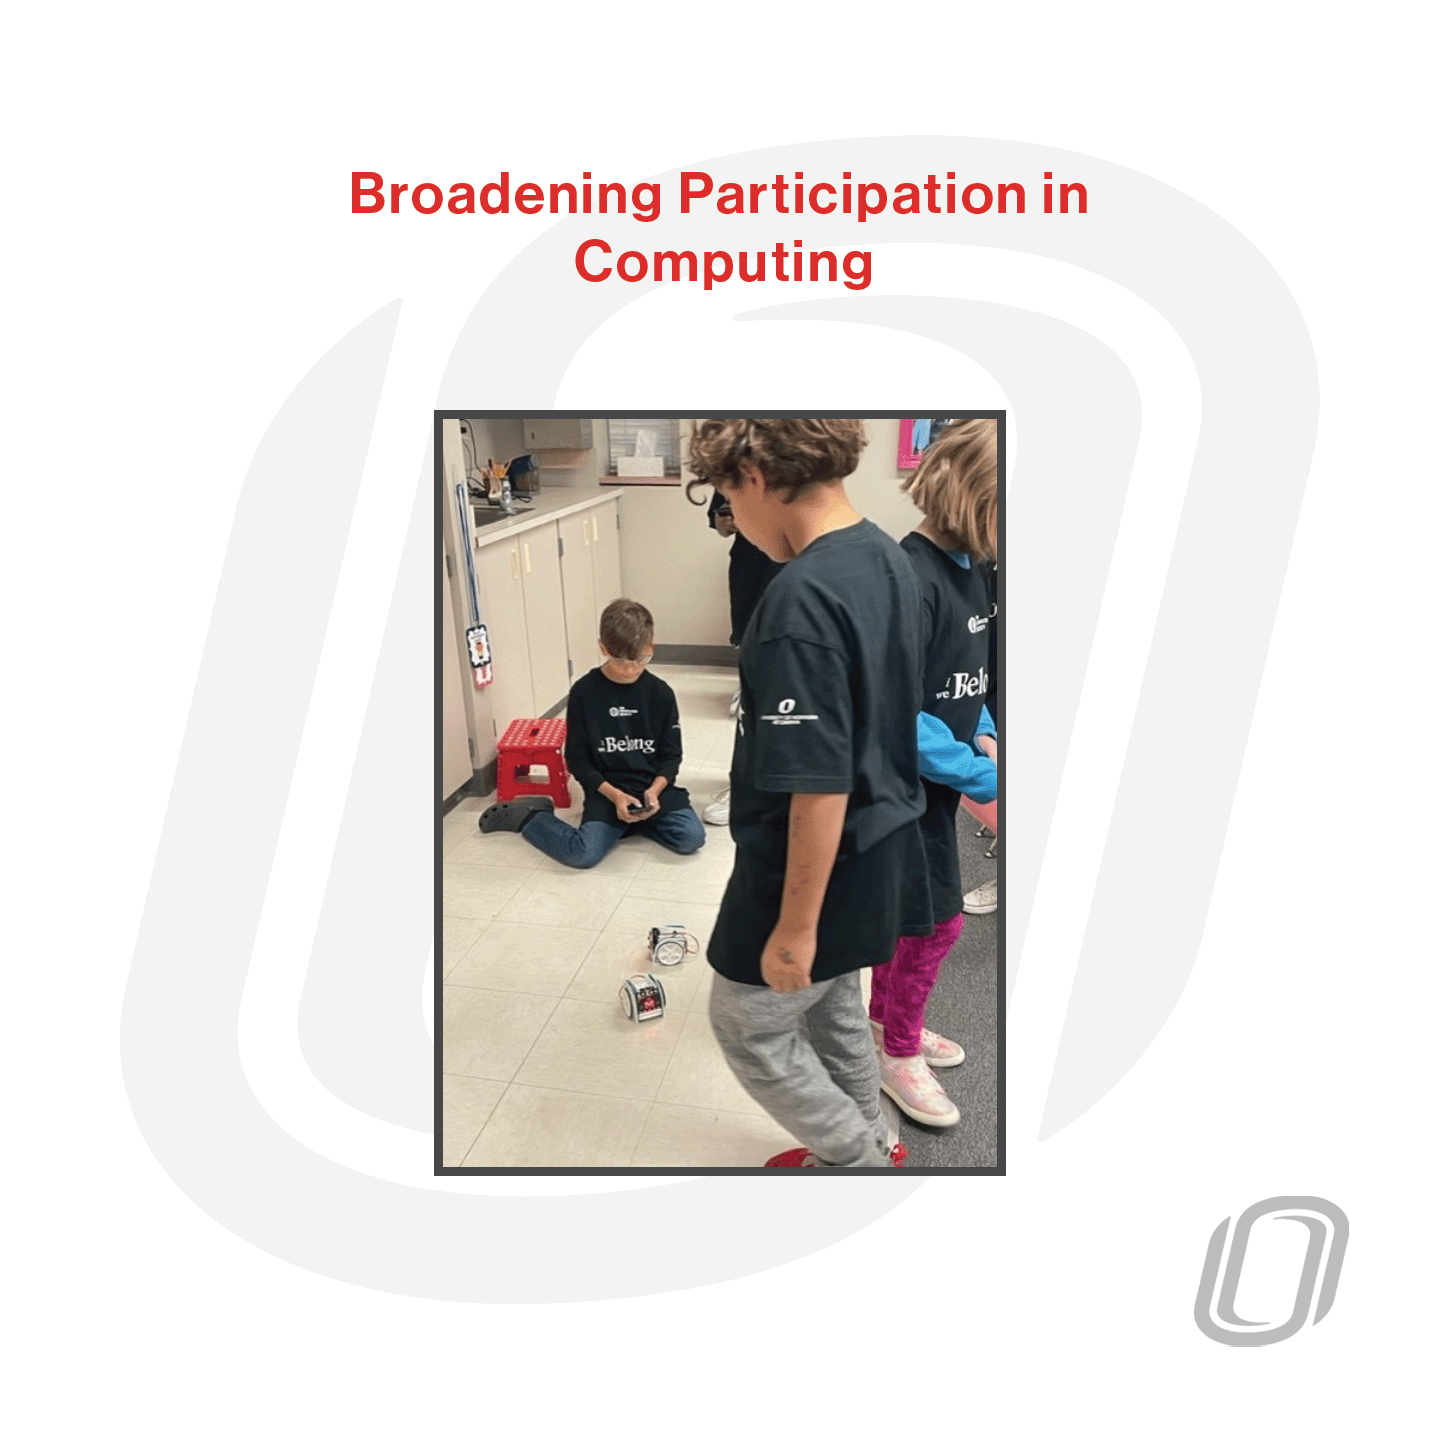 young adults playing with robots to illustrate the broadening participation in computing